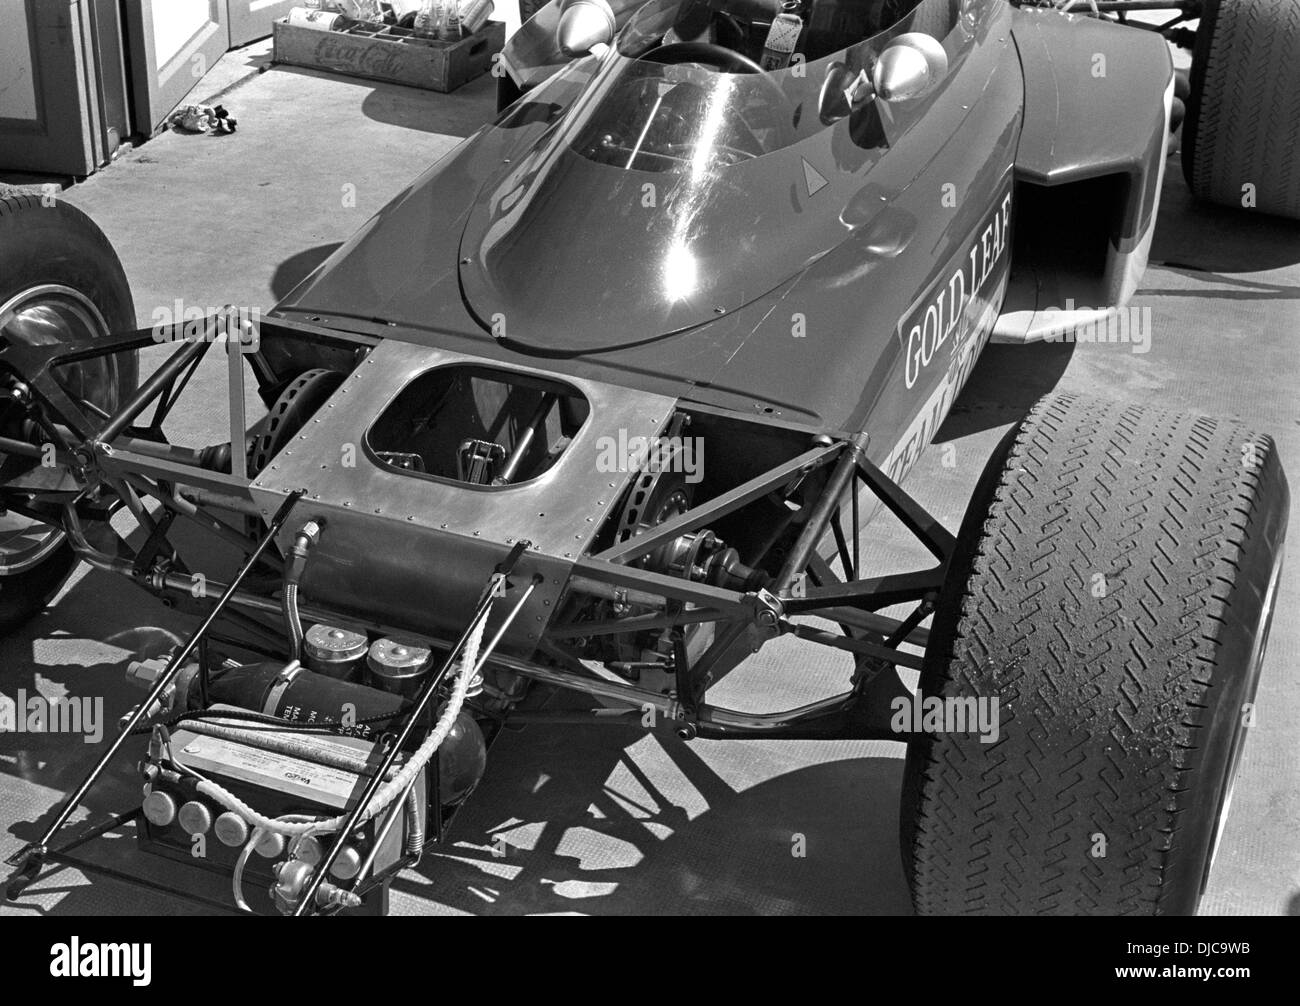 Lotus 72 inboard-mounted front disc brakes connected to front wheels by drive shafts. Spanish GP, Jarama, Spain 19 April 1970. Stock Photo